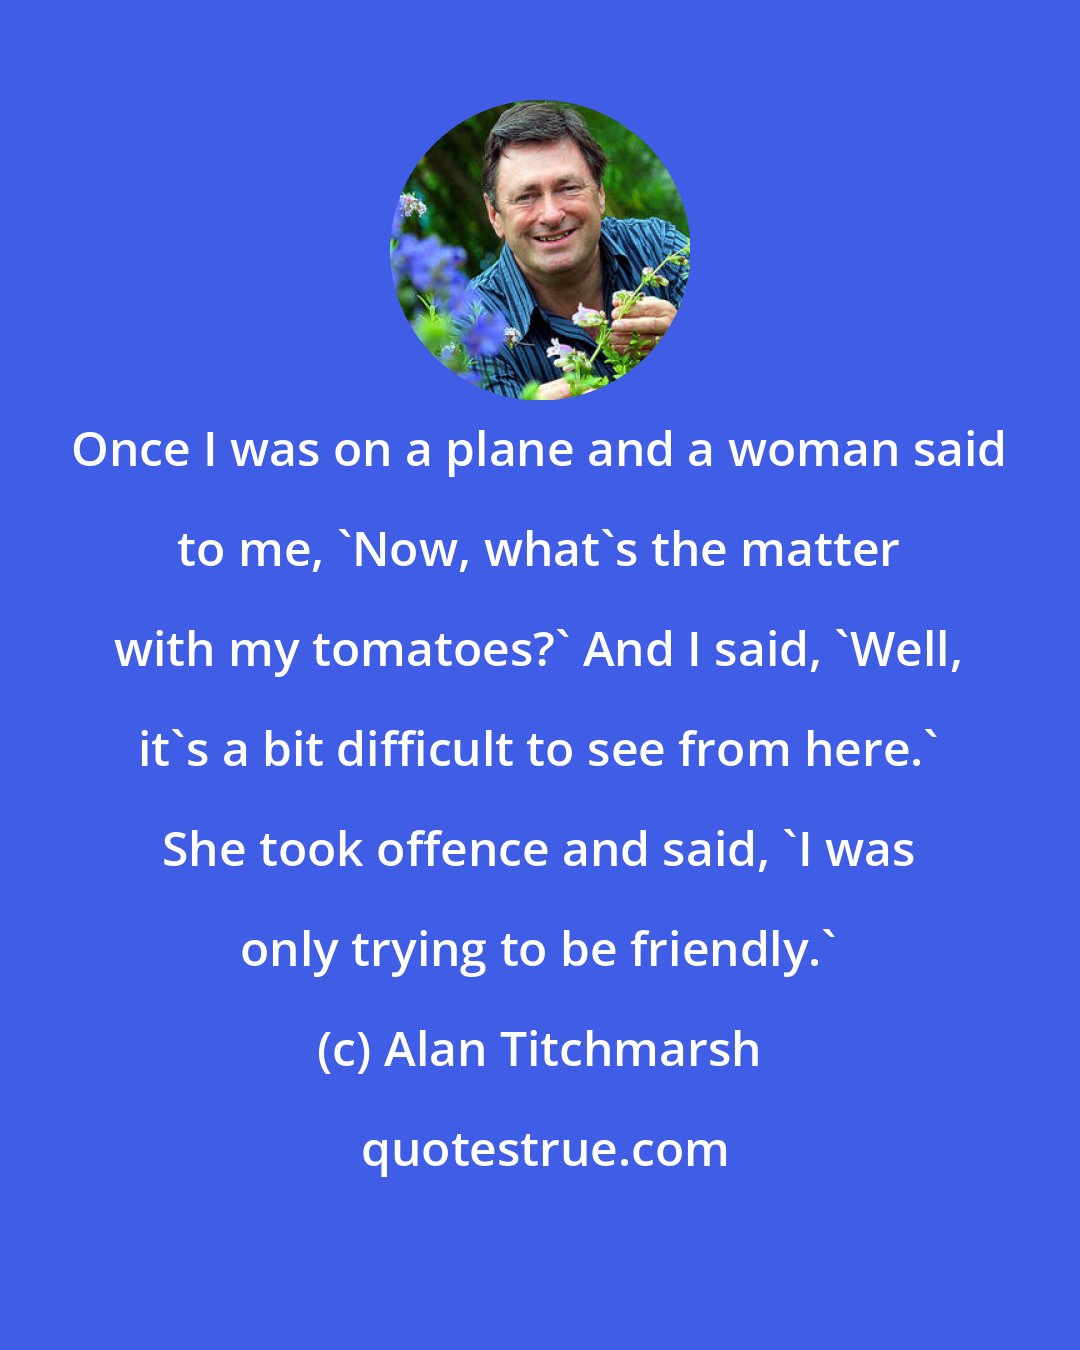 Alan Titchmarsh: Once I was on a plane and a woman said to me, 'Now, what's the matter with my tomatoes?' And I said, 'Well, it's a bit difficult to see from here.' She took offence and said, 'I was only trying to be friendly.'